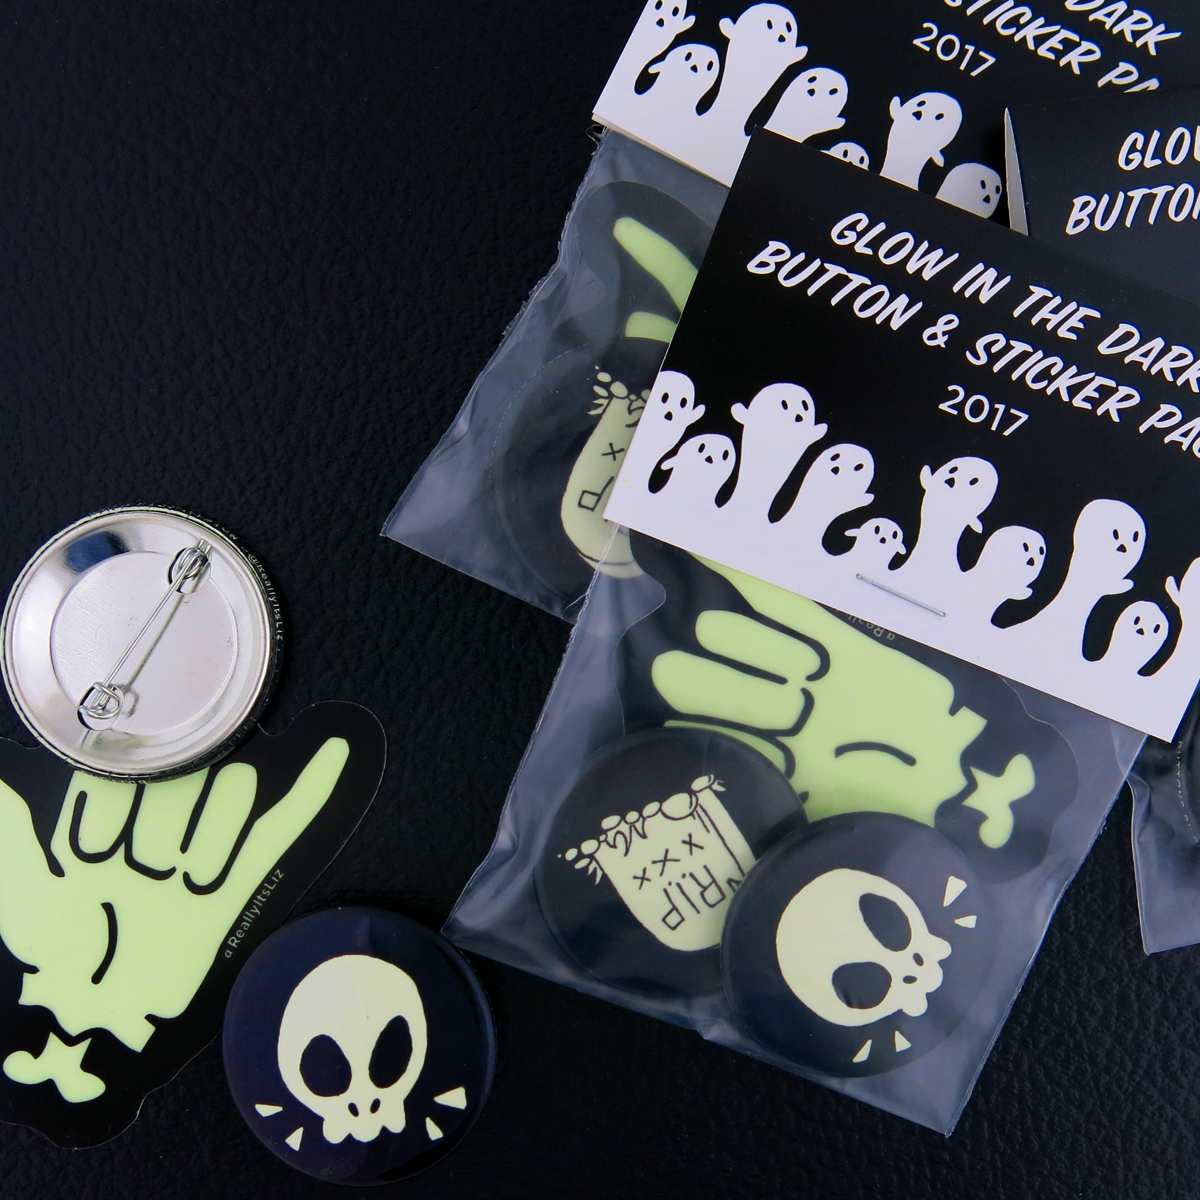 glow in the dark buttons and stickers